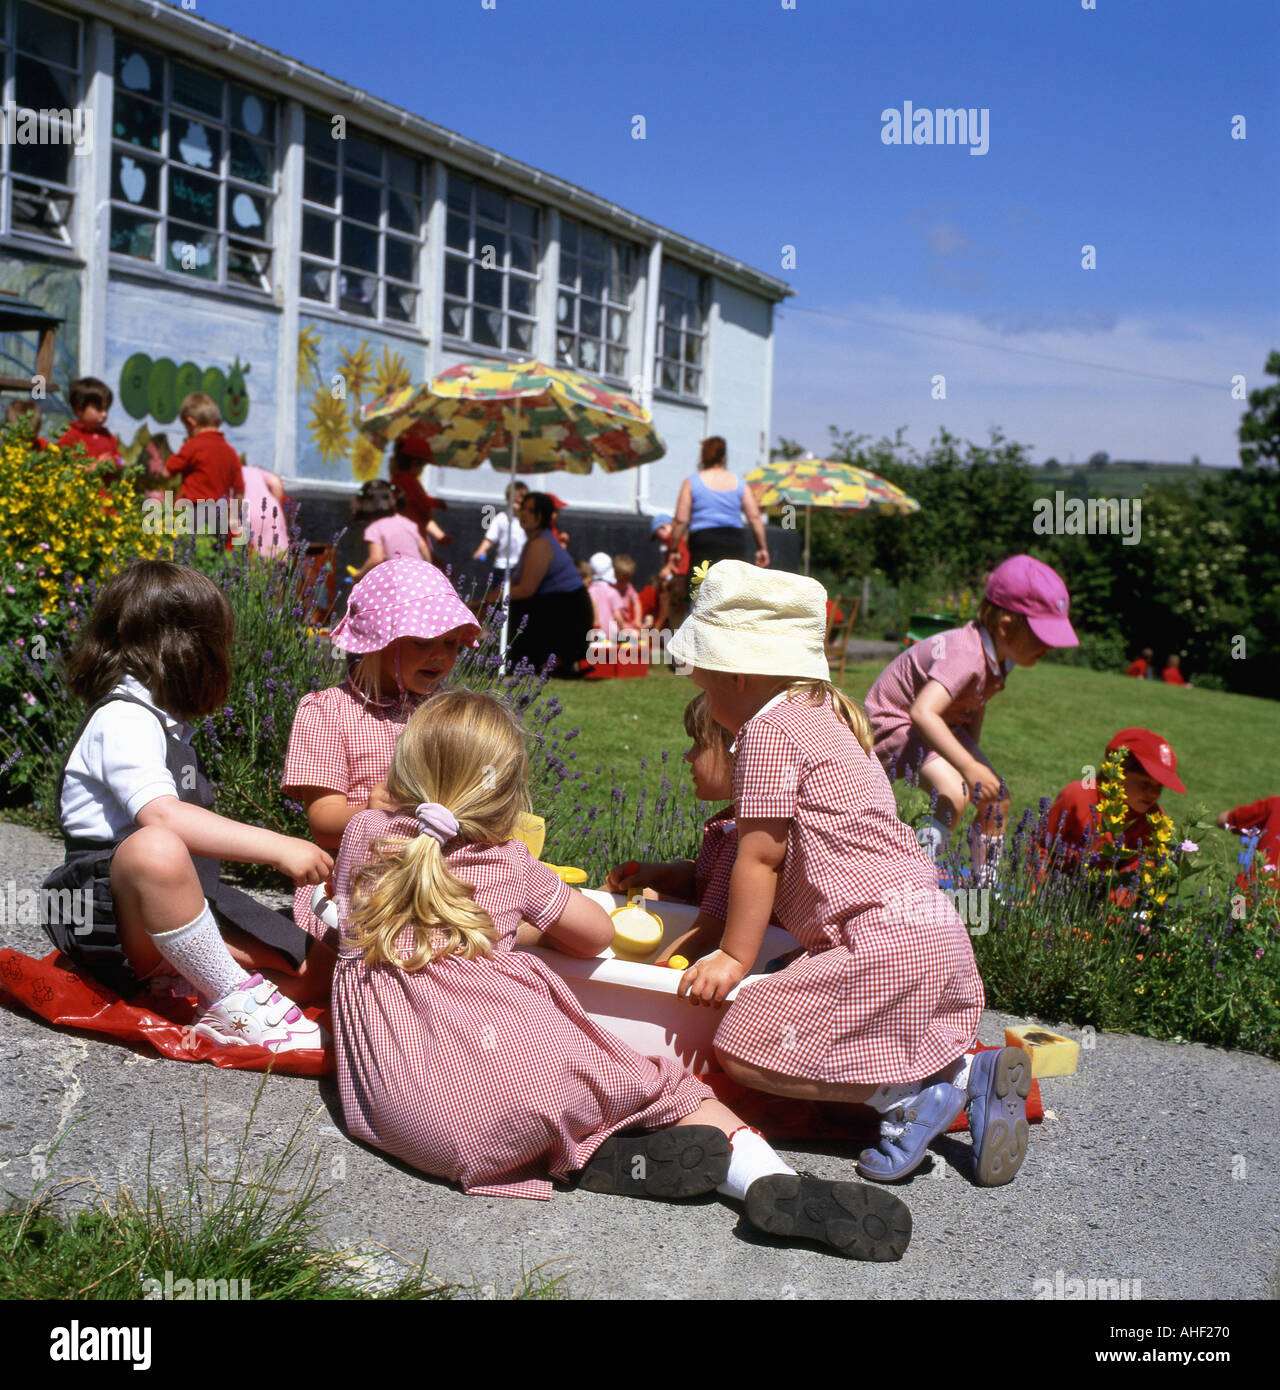 Nursery  children playing outside in garden summer sunshine at a Welsh school in the town of Llandeilo Carmarthenshire (Dyfed) Wales UK   KATHY DEWITT Stock Photo